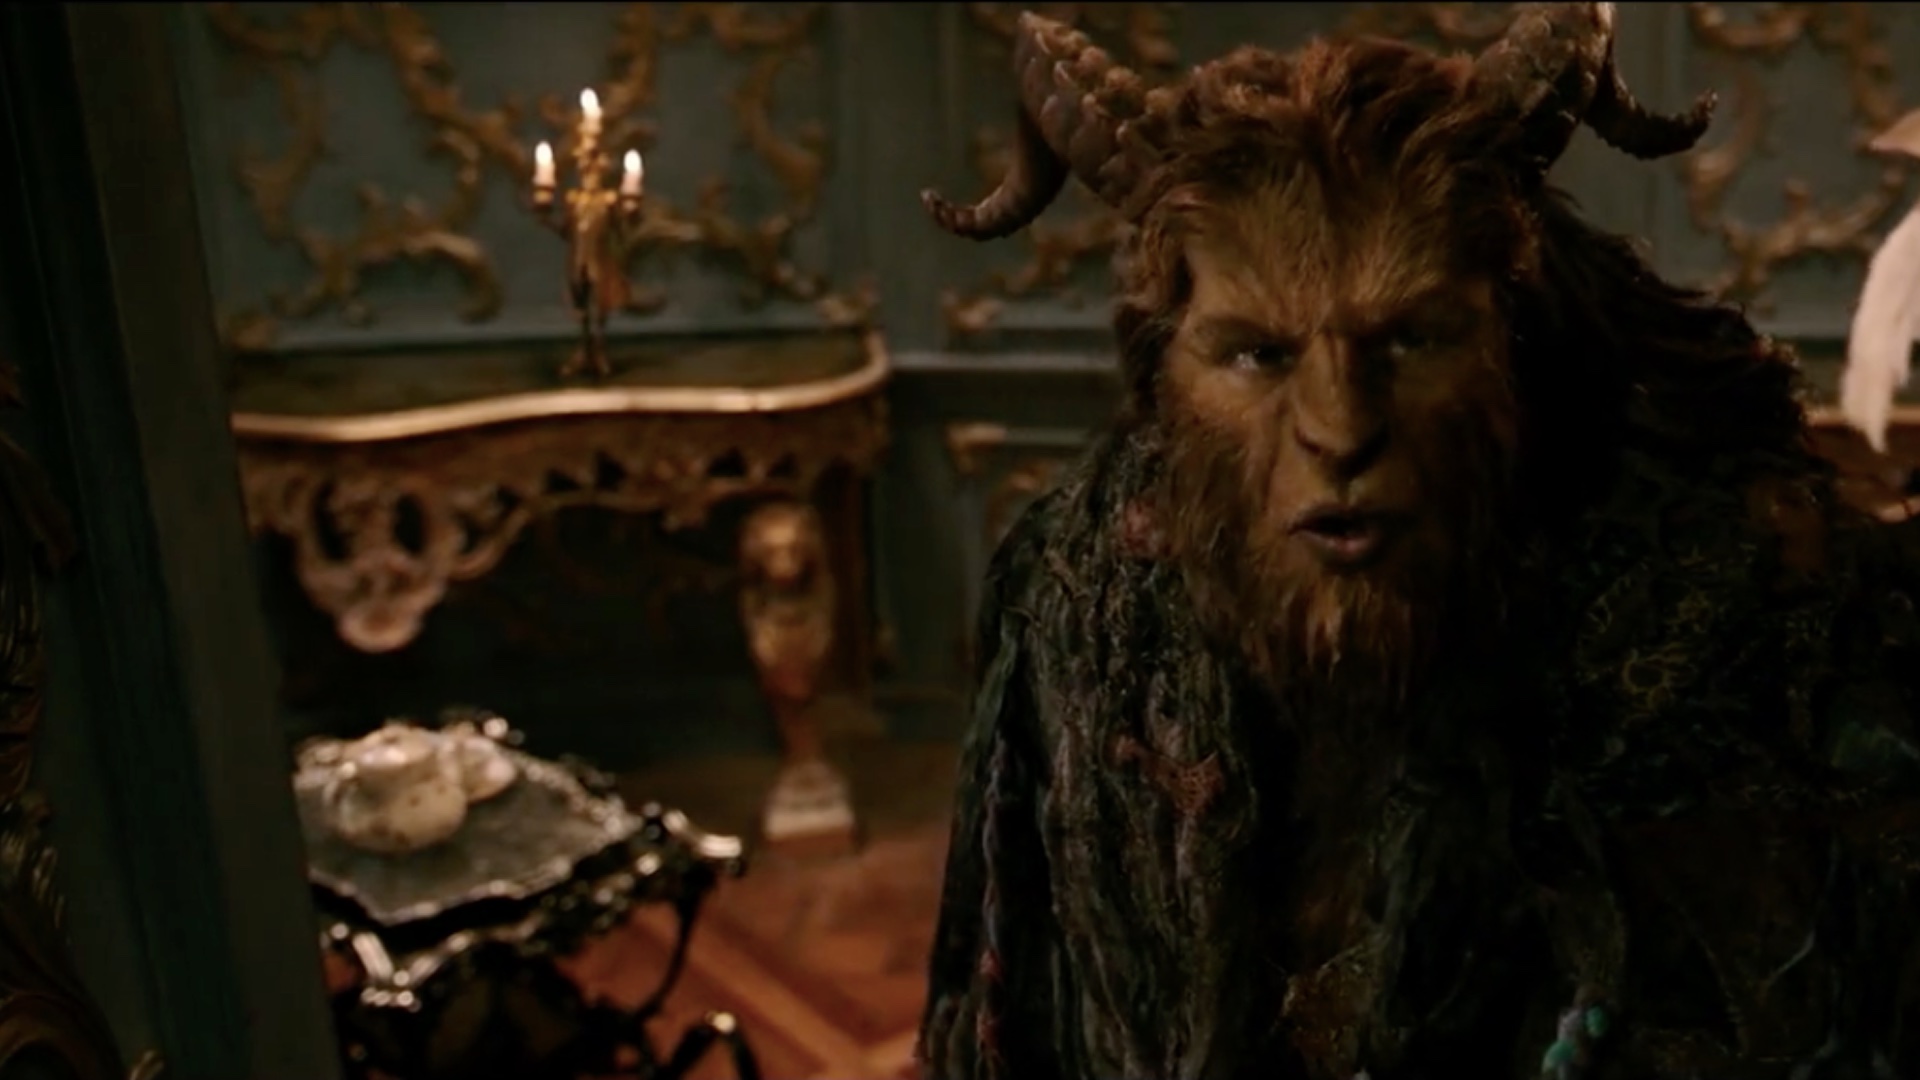 Watch a Beastly Invitation in New BEAUTY AND THE BEAST Clip — GeekTyrant